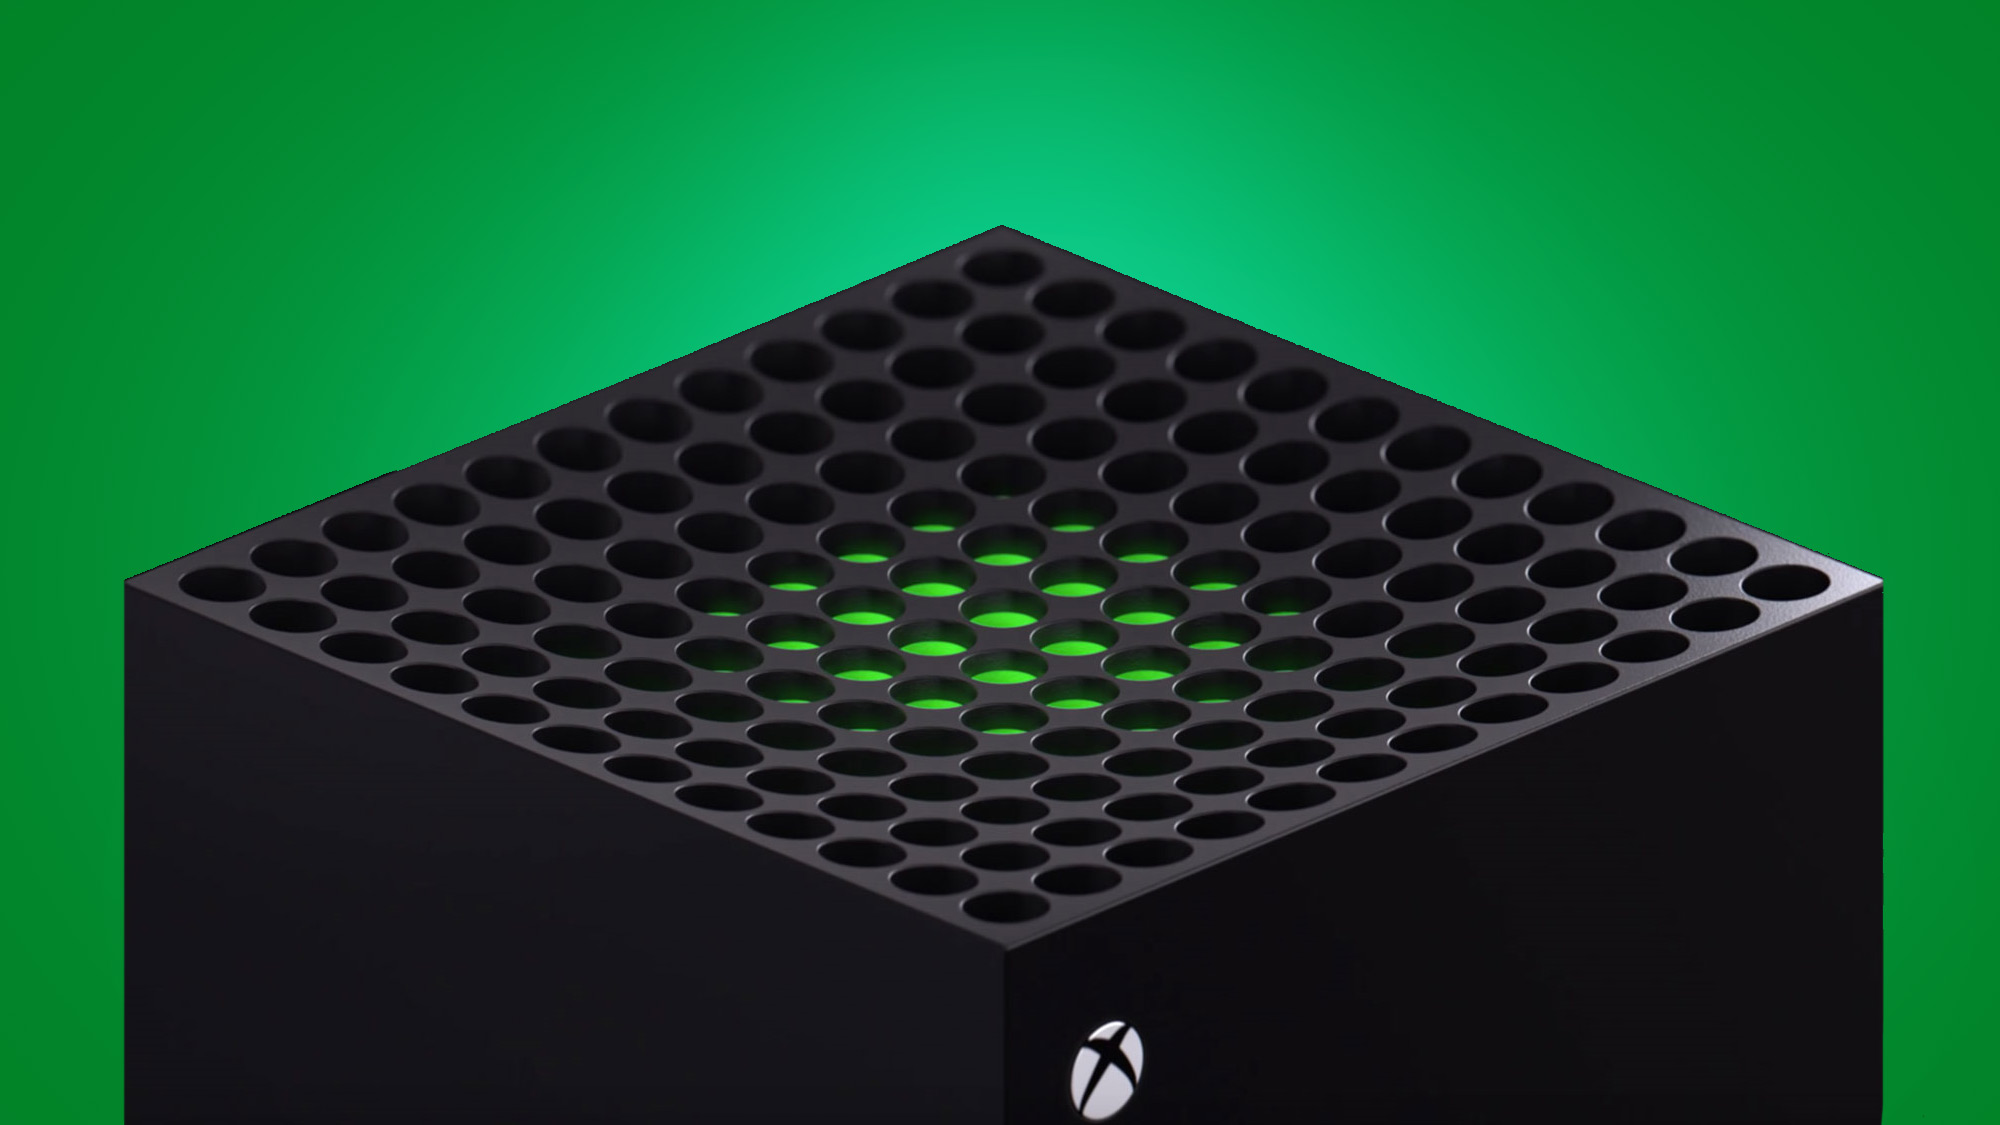 places to buy xbox one